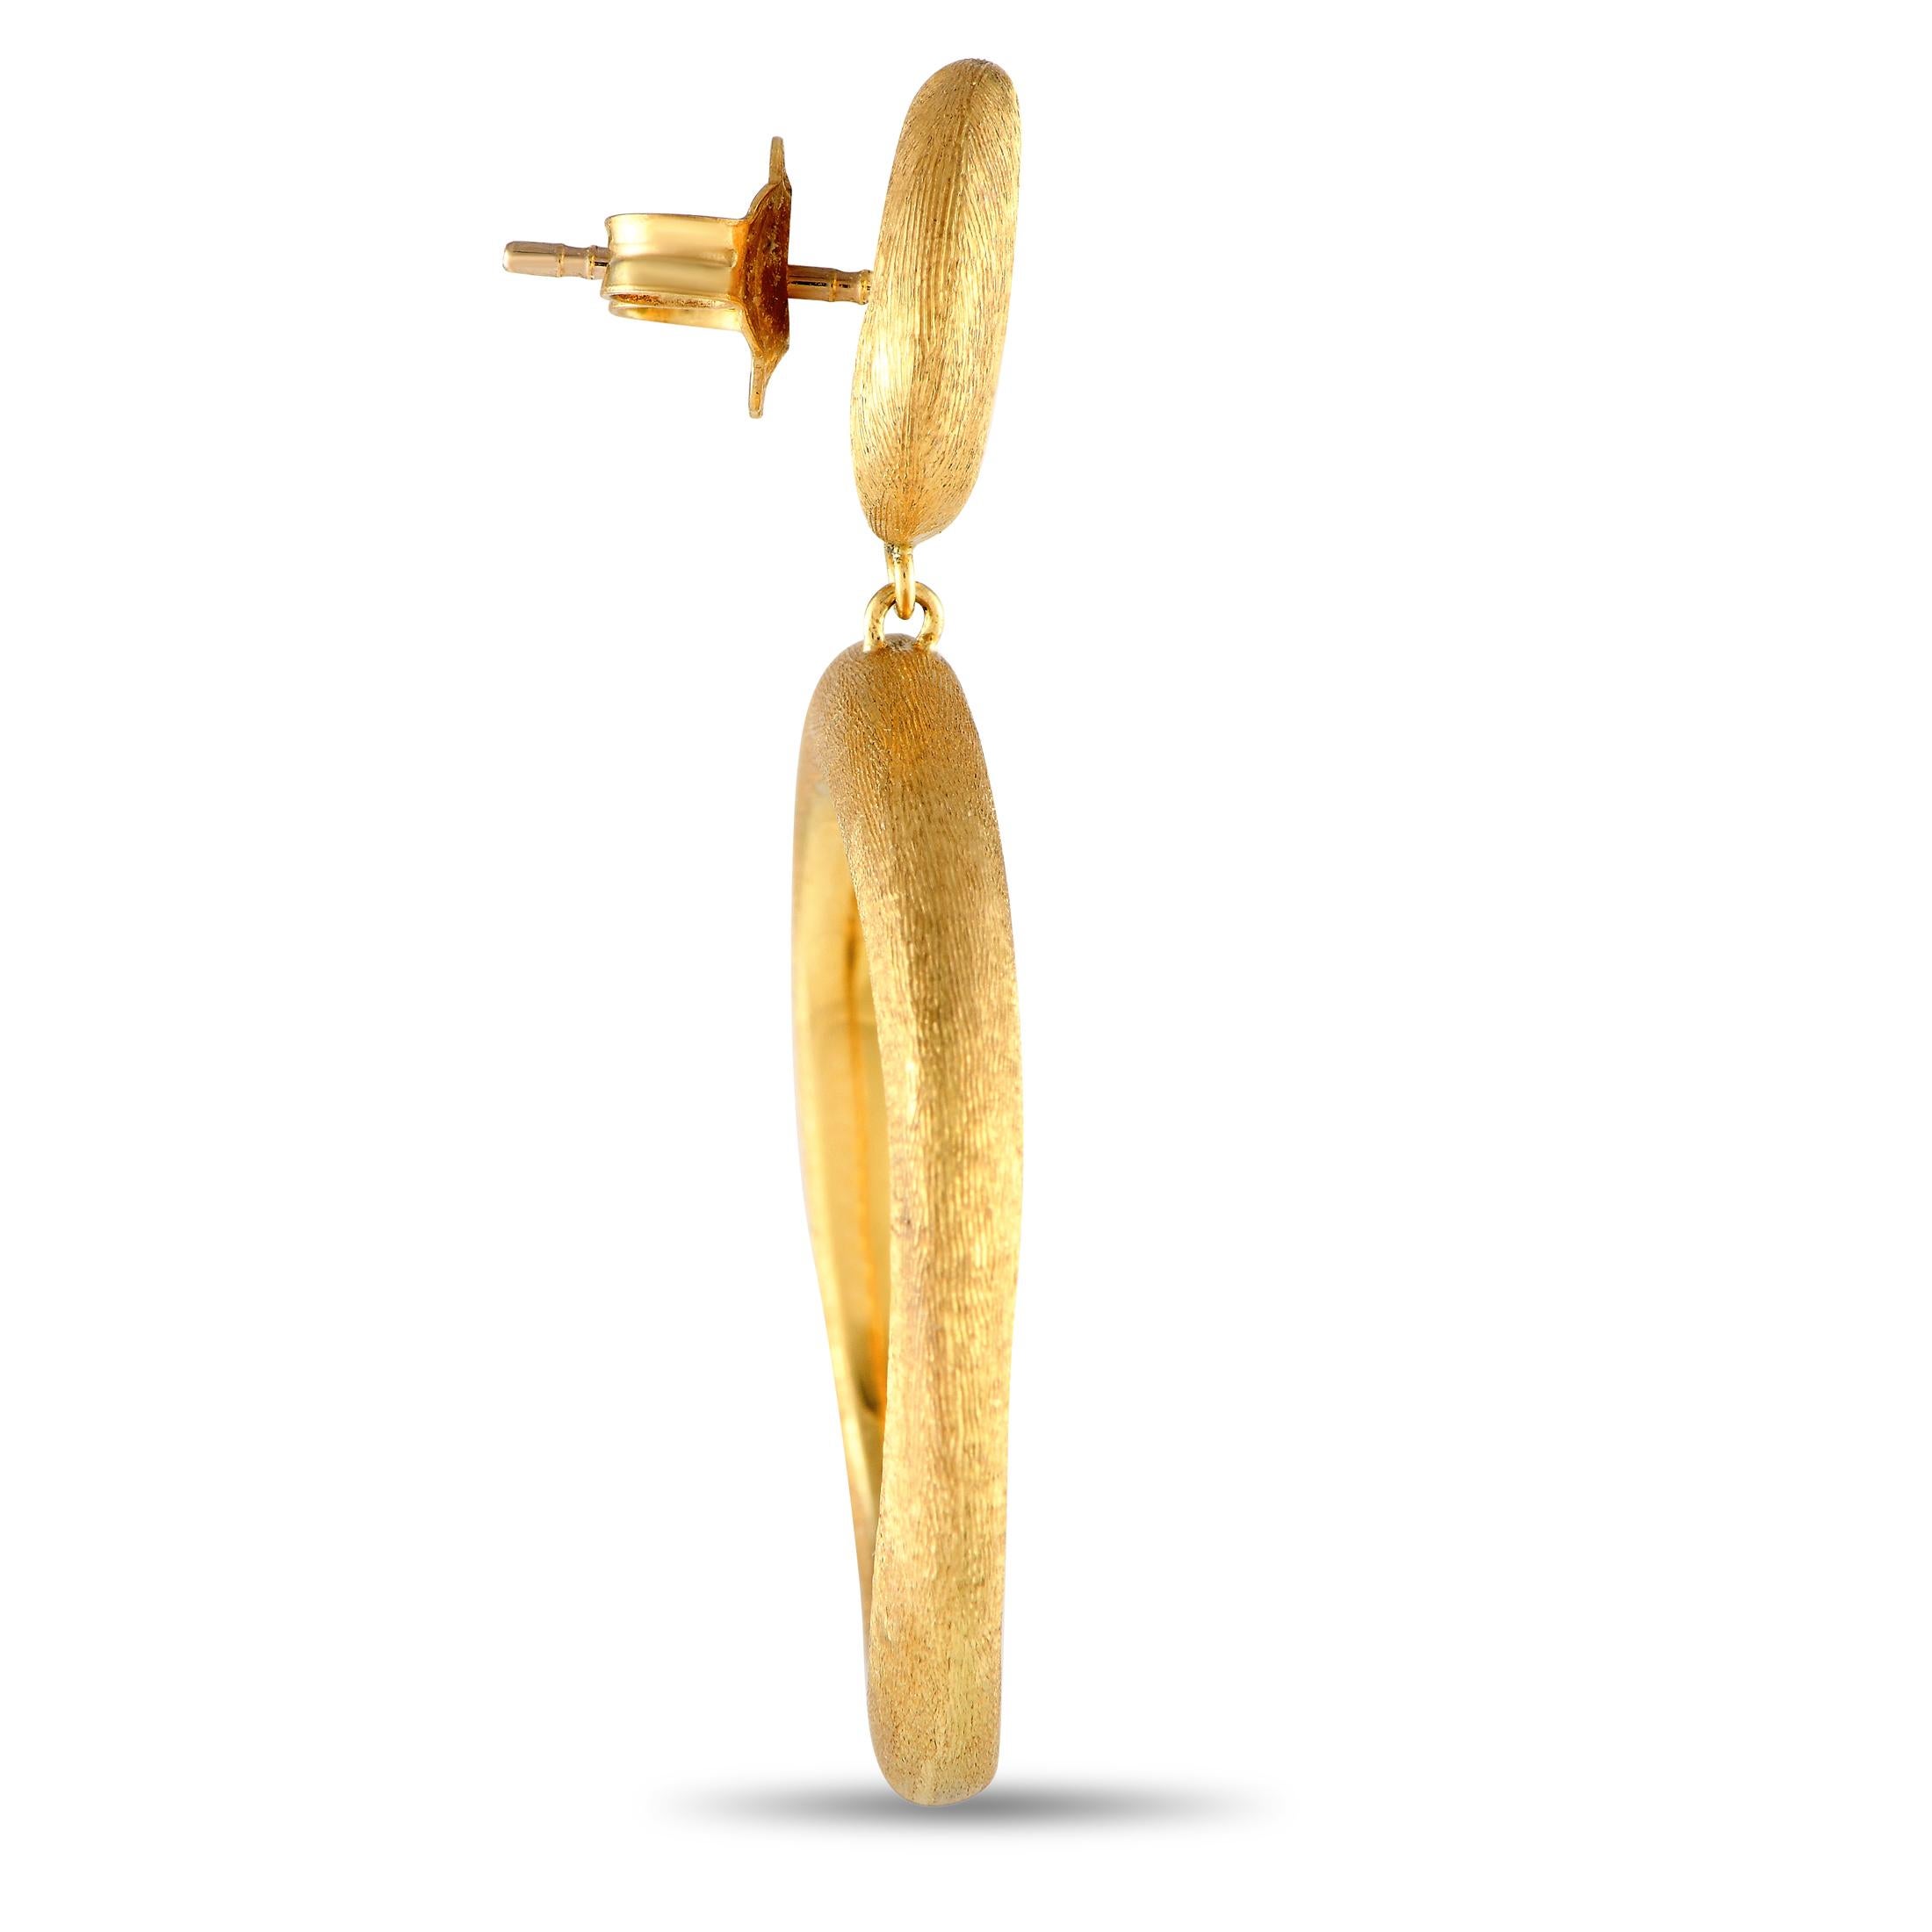 Engraved by hand for a silk-like brushed finish, textured 18K Yellow Gold adds impressive dimension to the minimalist design of these Marco Bicego Jaipur earrings. Each one measures 1.5 long by 1.0 wide and includes post closure.This jewelry piece